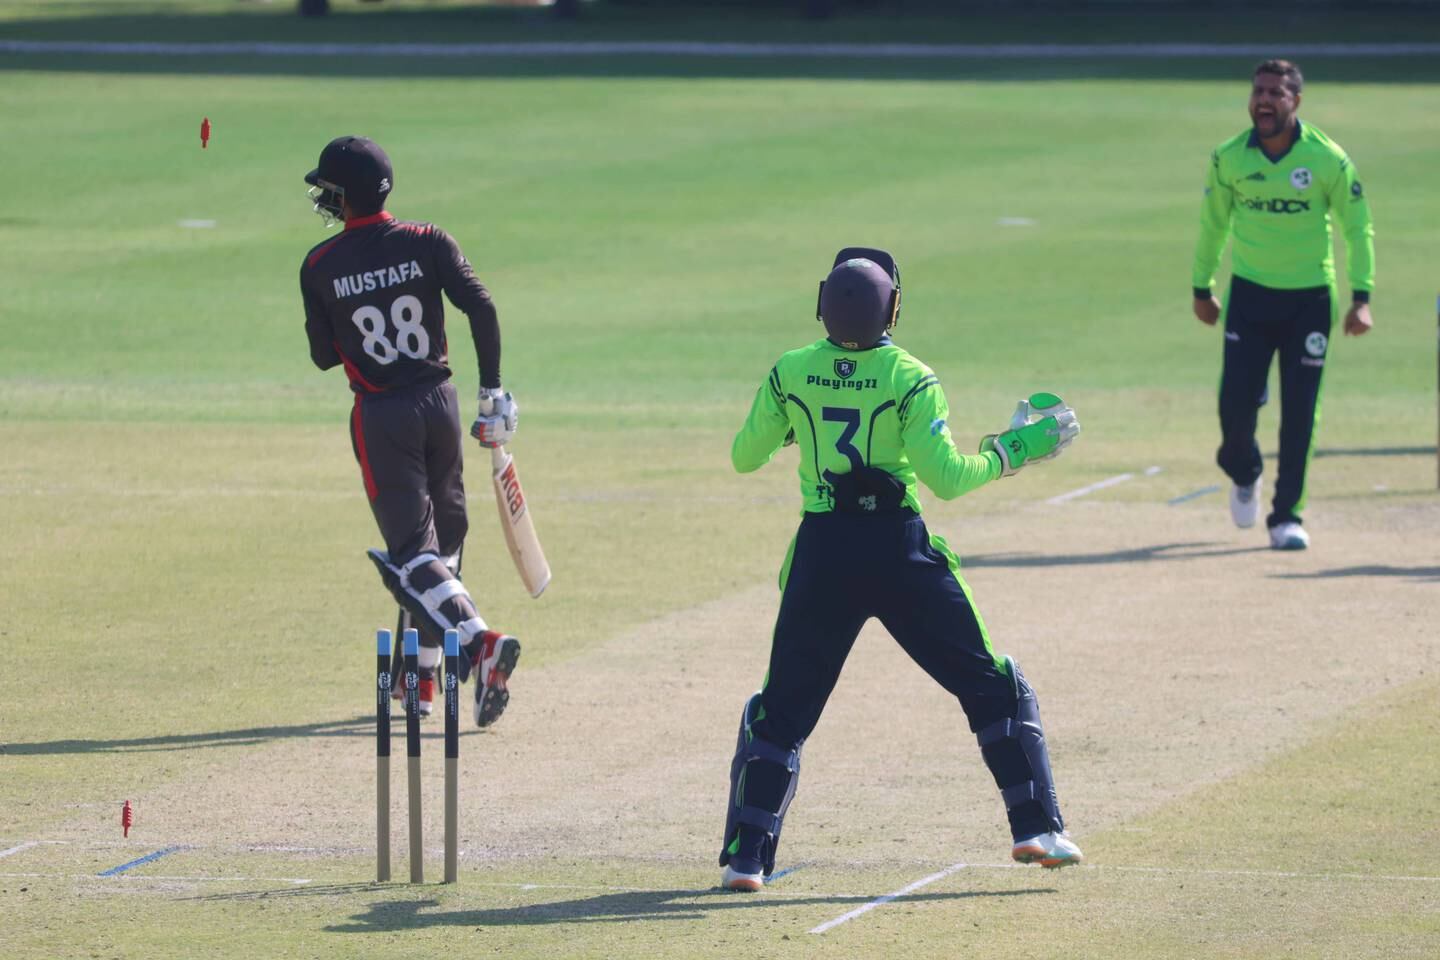 Simi Singh of Ireland takes wicket of Rohan Mustafa in the ICC World T20 Global Qualifiers A match between Ireland and the UAE in Muscat, Oman, on February 18, 2022.